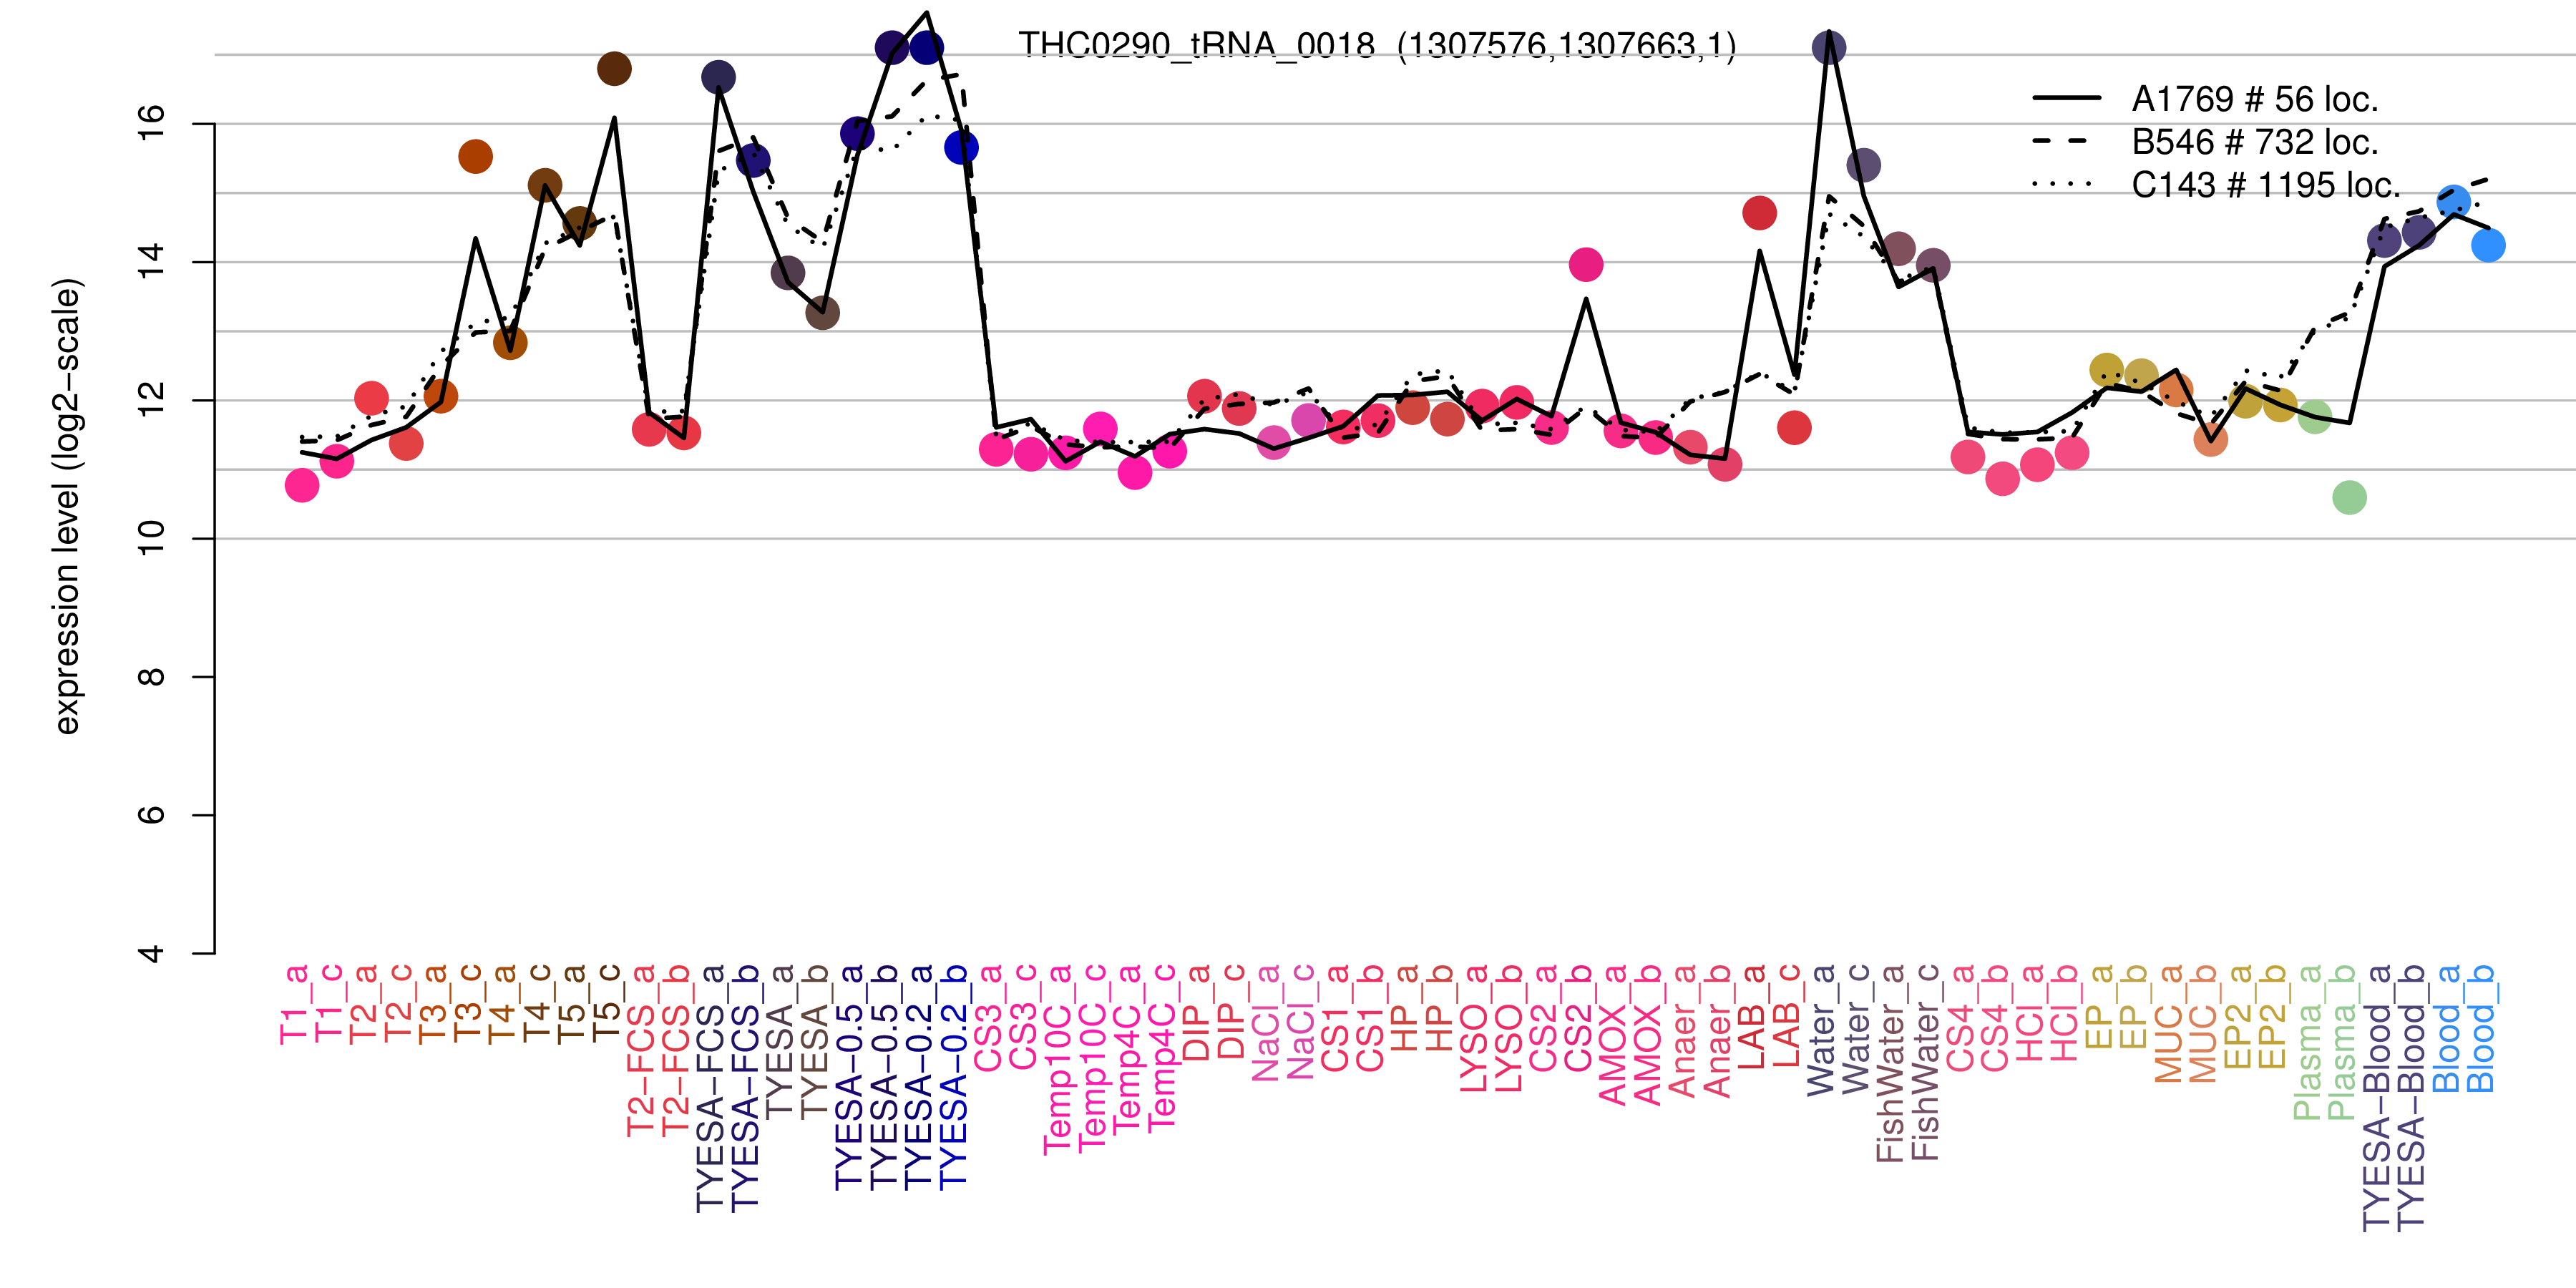 THC0290_tRNA_0018 expression levels among conditions